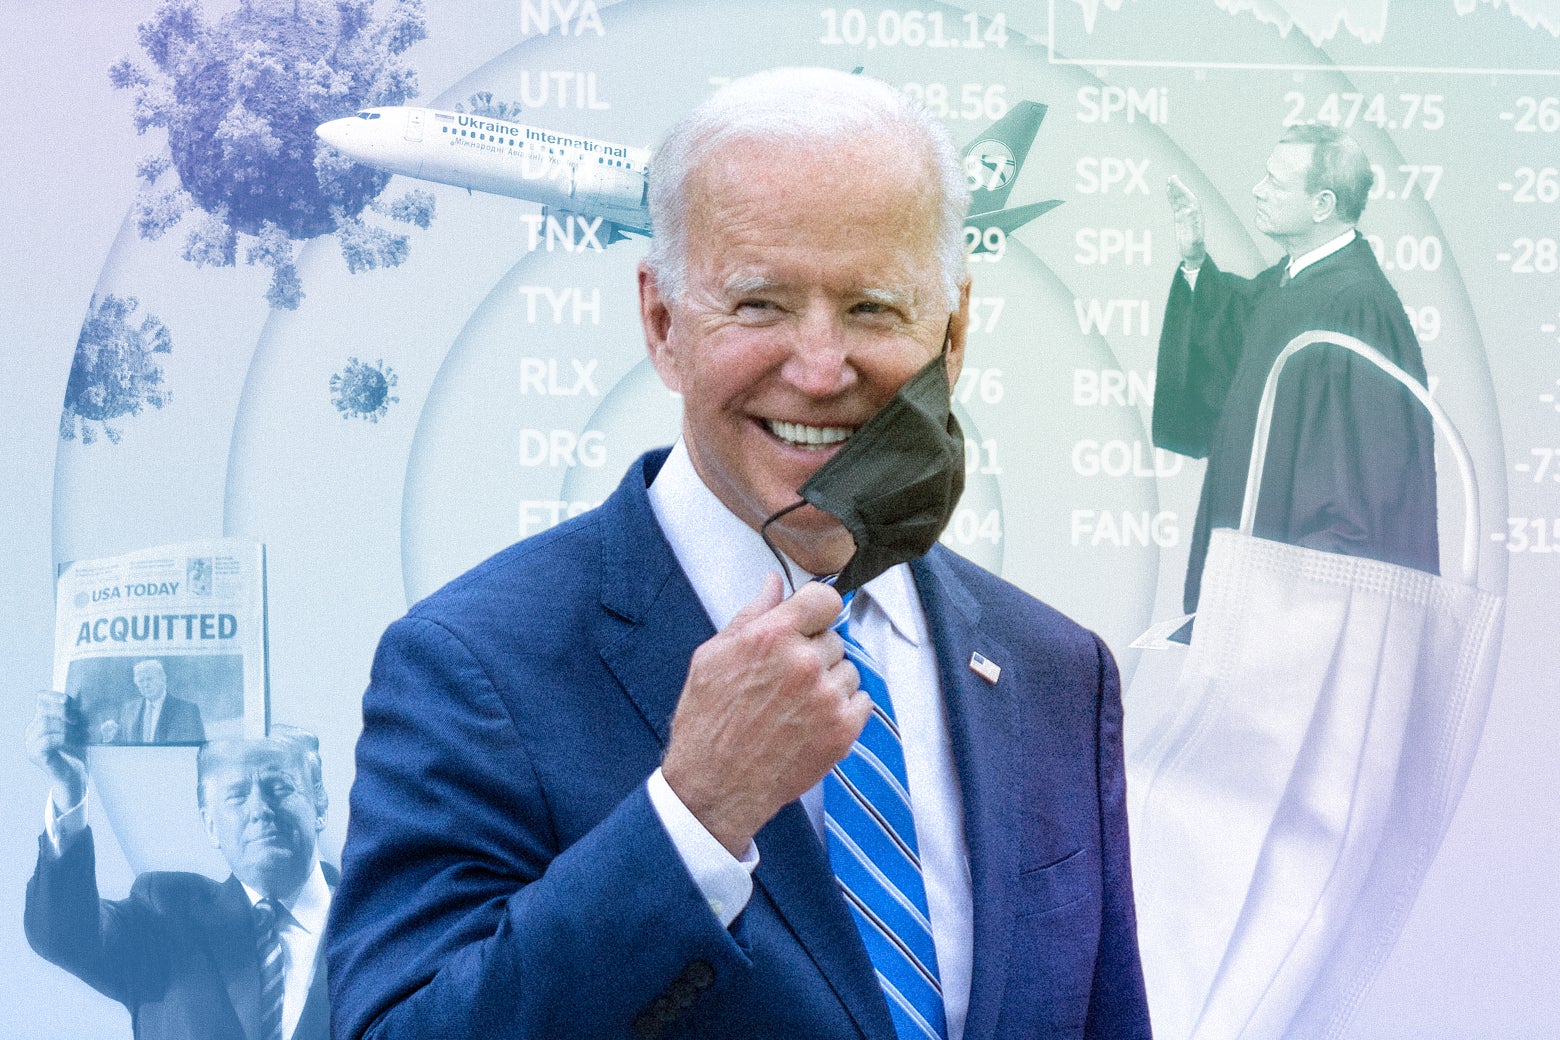 A photo collage of Biden holding a mask, John Roberts, Trump holding up a paper that reads AQUITTED, an airplane, and a close-up of the COVID-19 virus